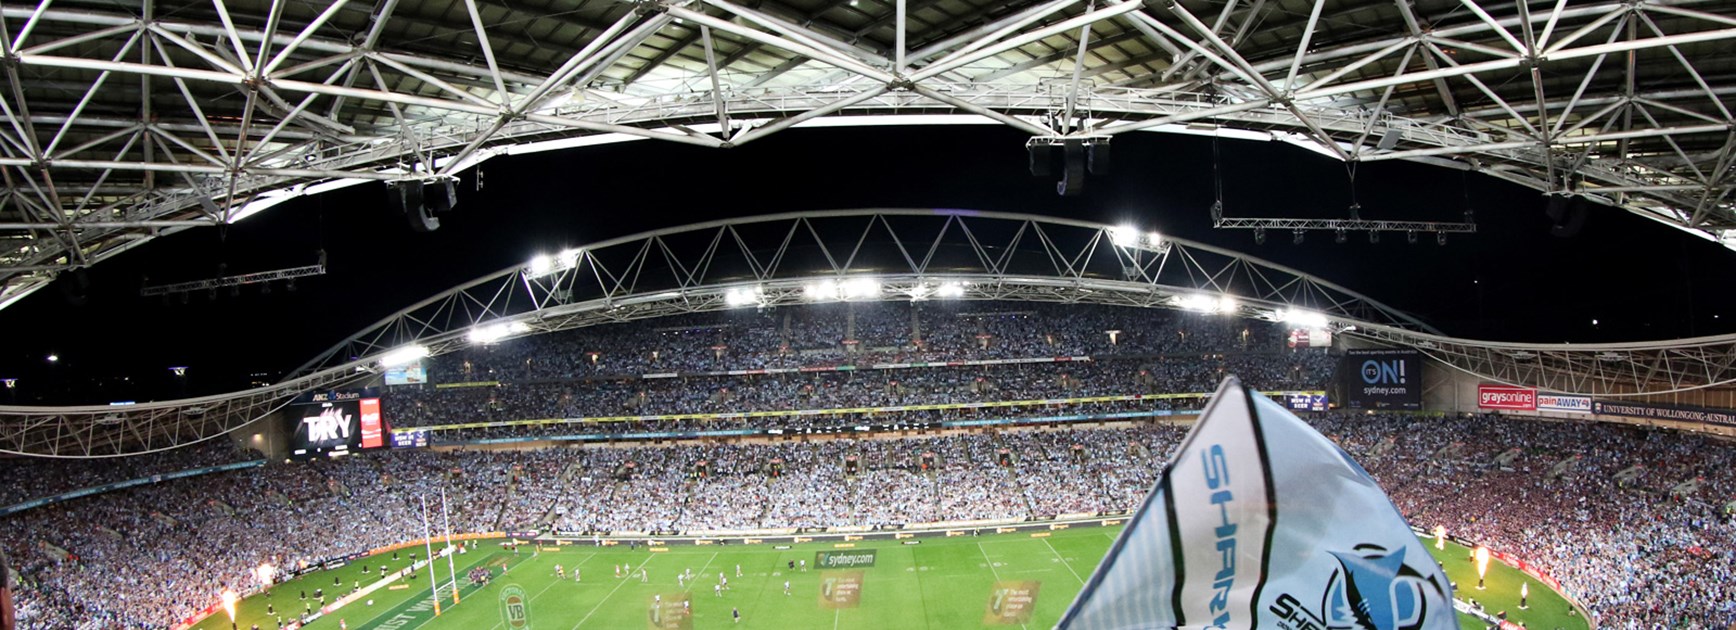 The crowd at the 2016 NRL Grand Final.